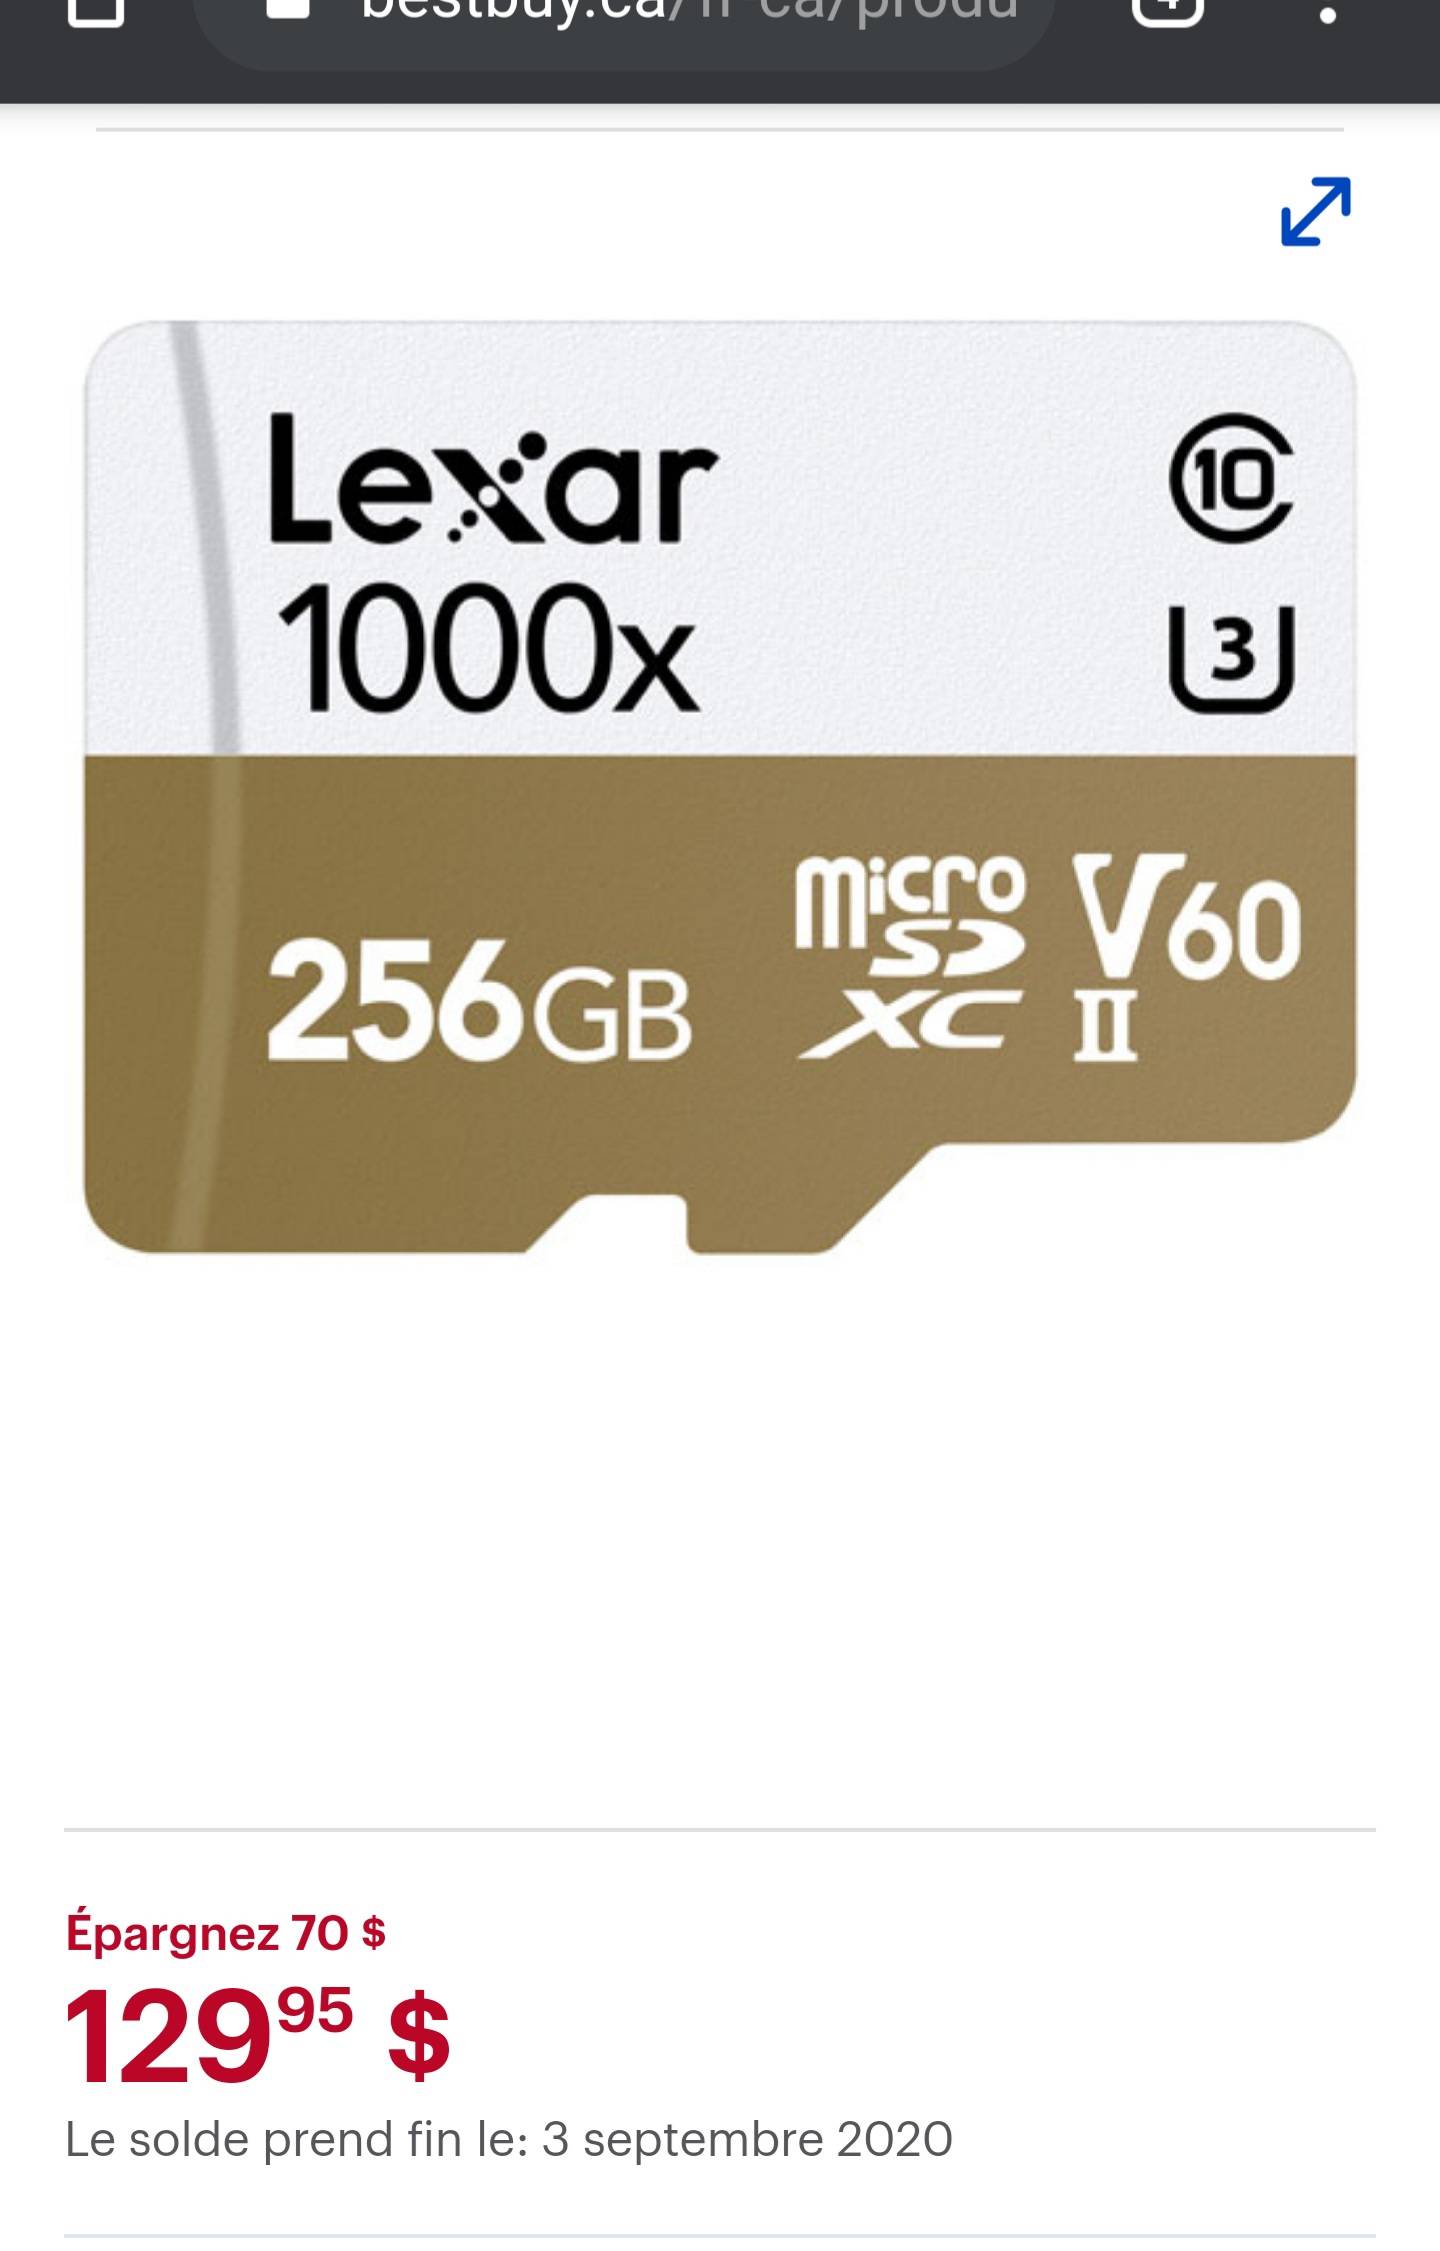 samsung s9... max size of micro sd card is 400 go? - Samsung Members